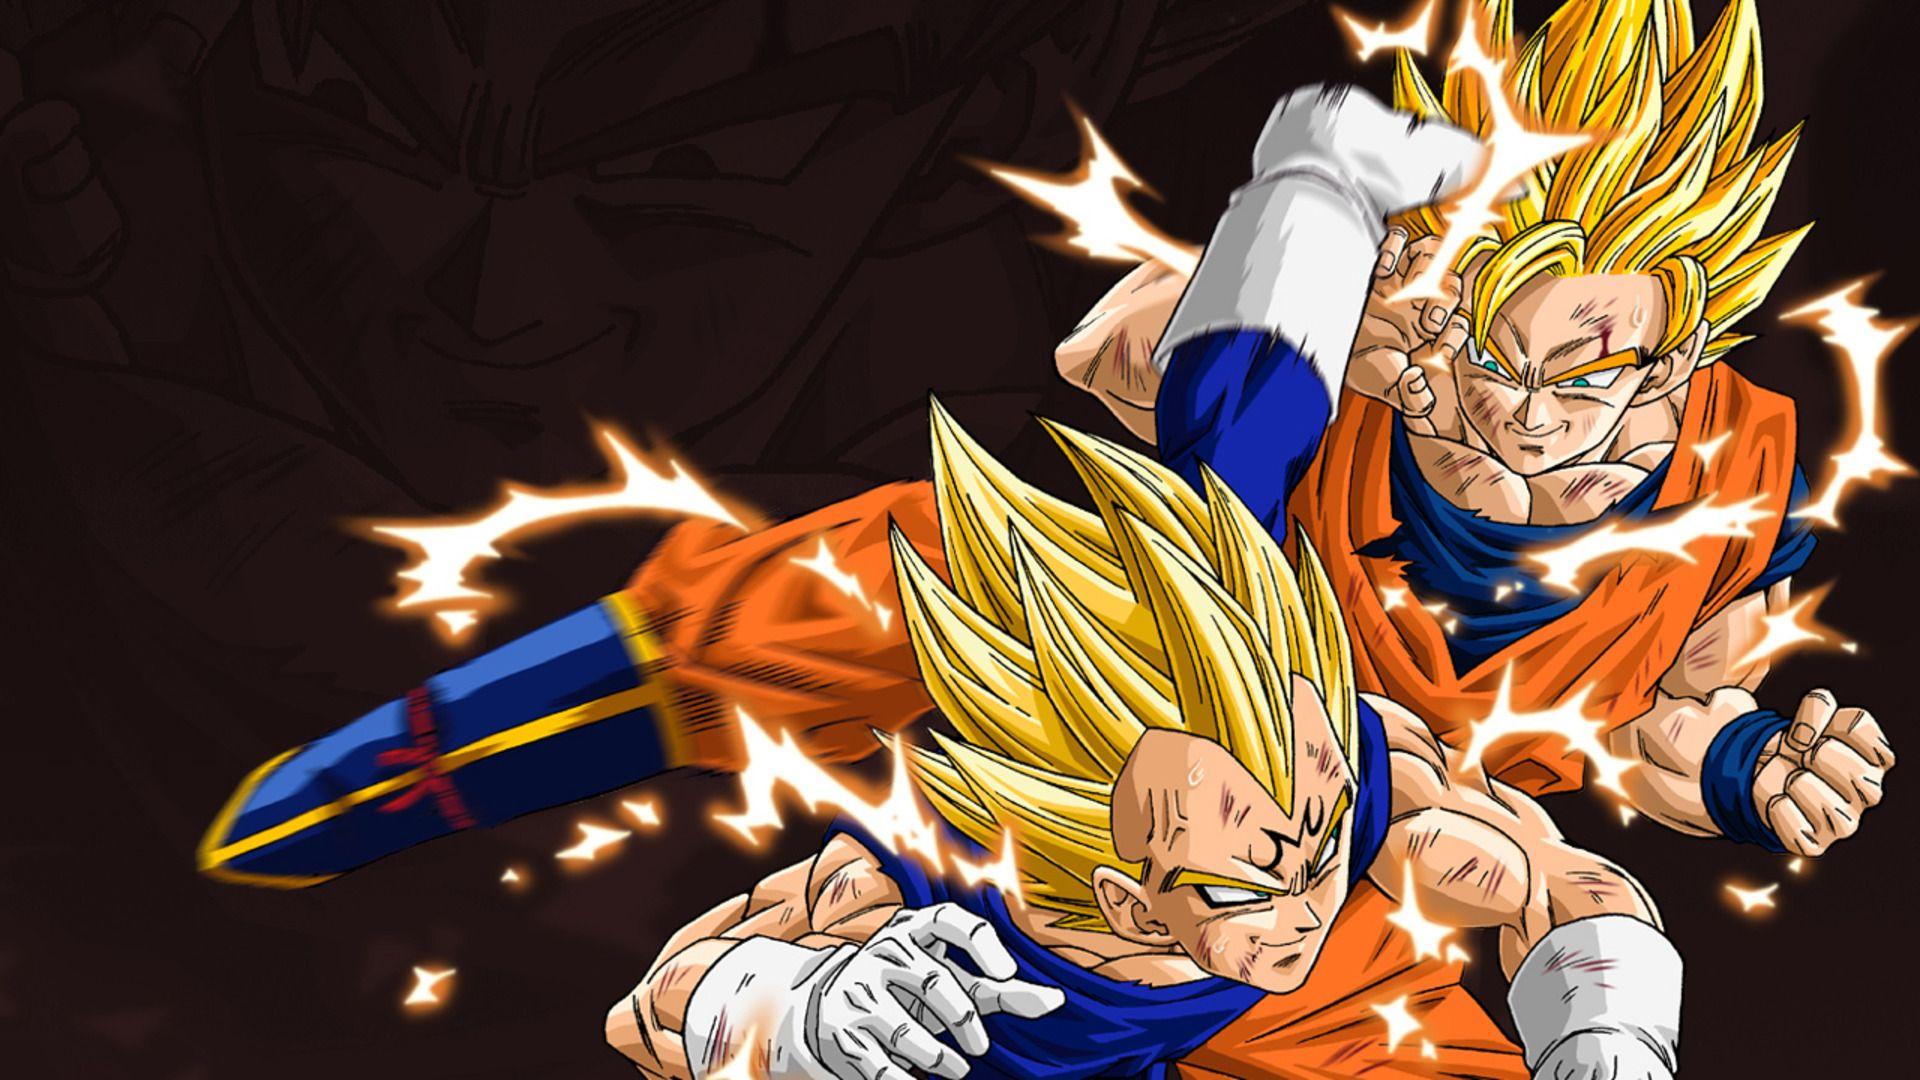 Dragon Ball Z Full HD Wallpaper and Background Imagex1080